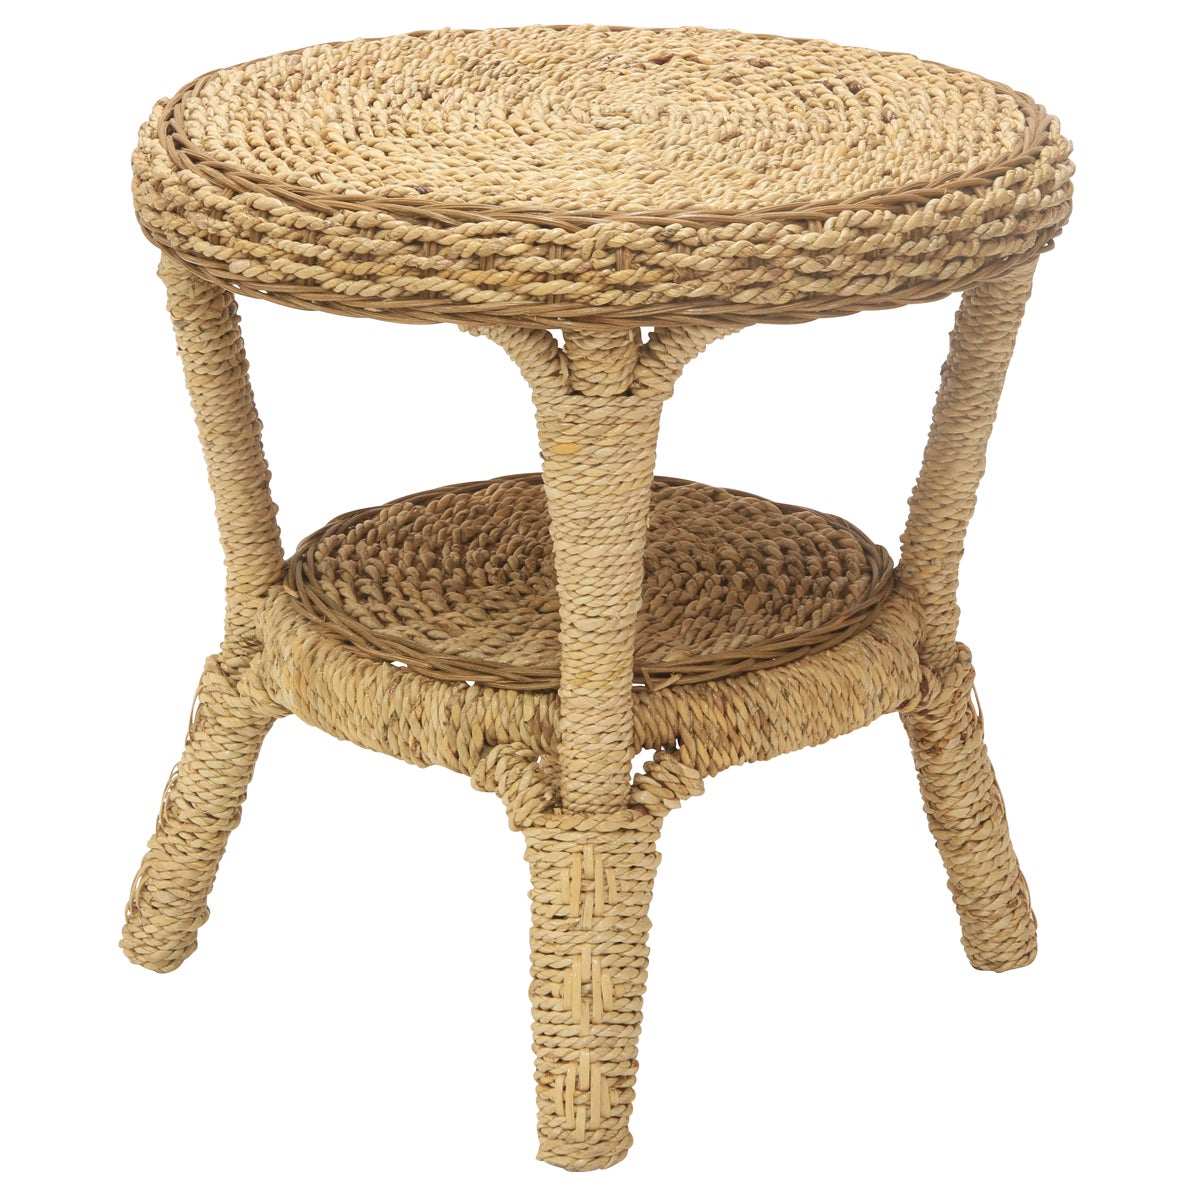 Kensington Cane/Rattan Round Side Table Natural Seagrass